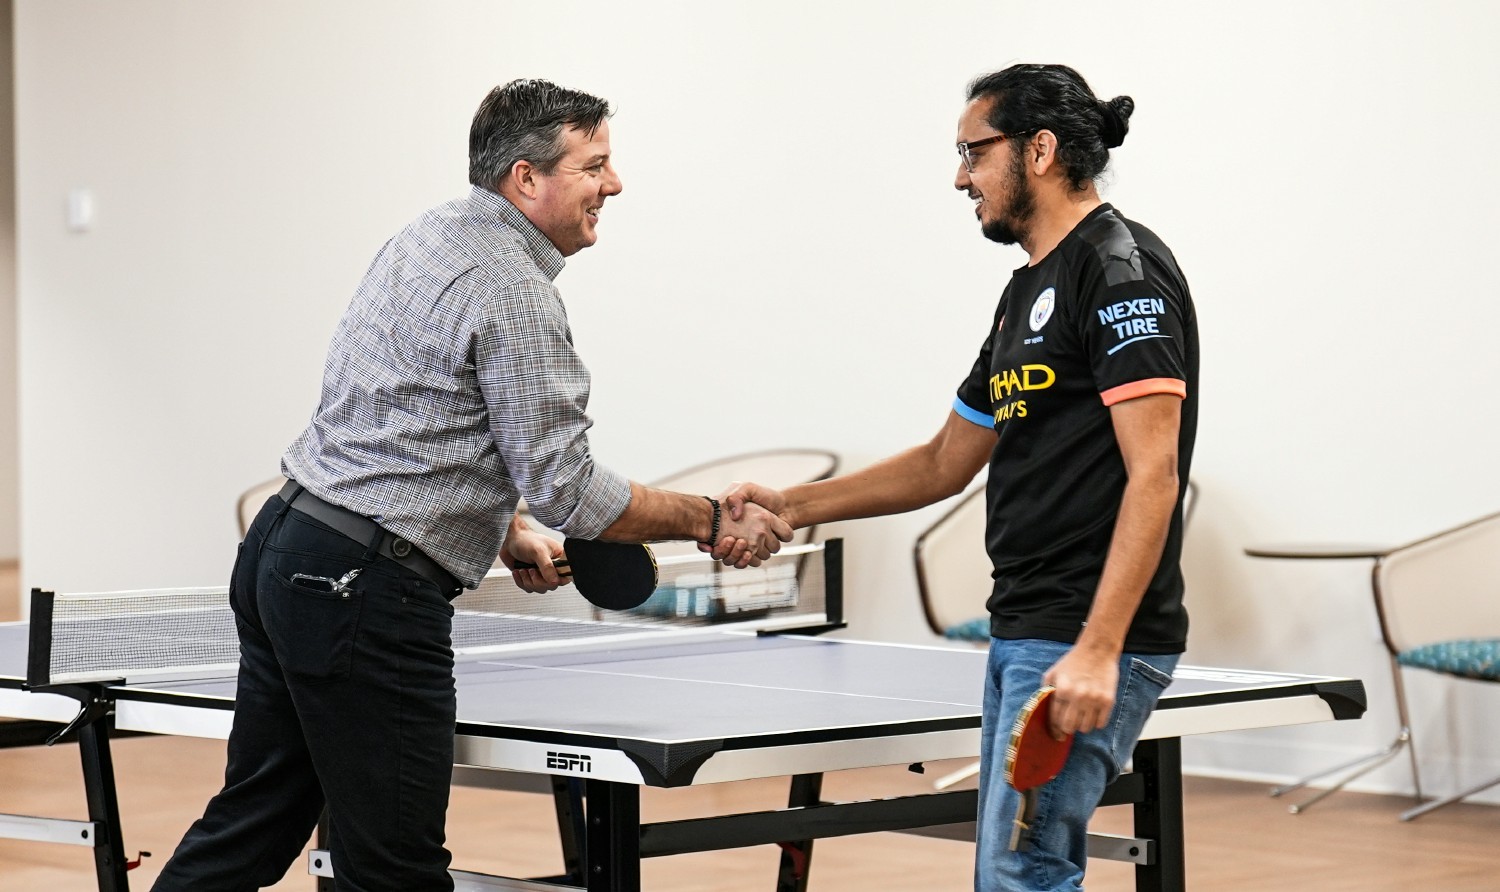 Associates take some time to let loose and connect on a personal level with Table Tennis.